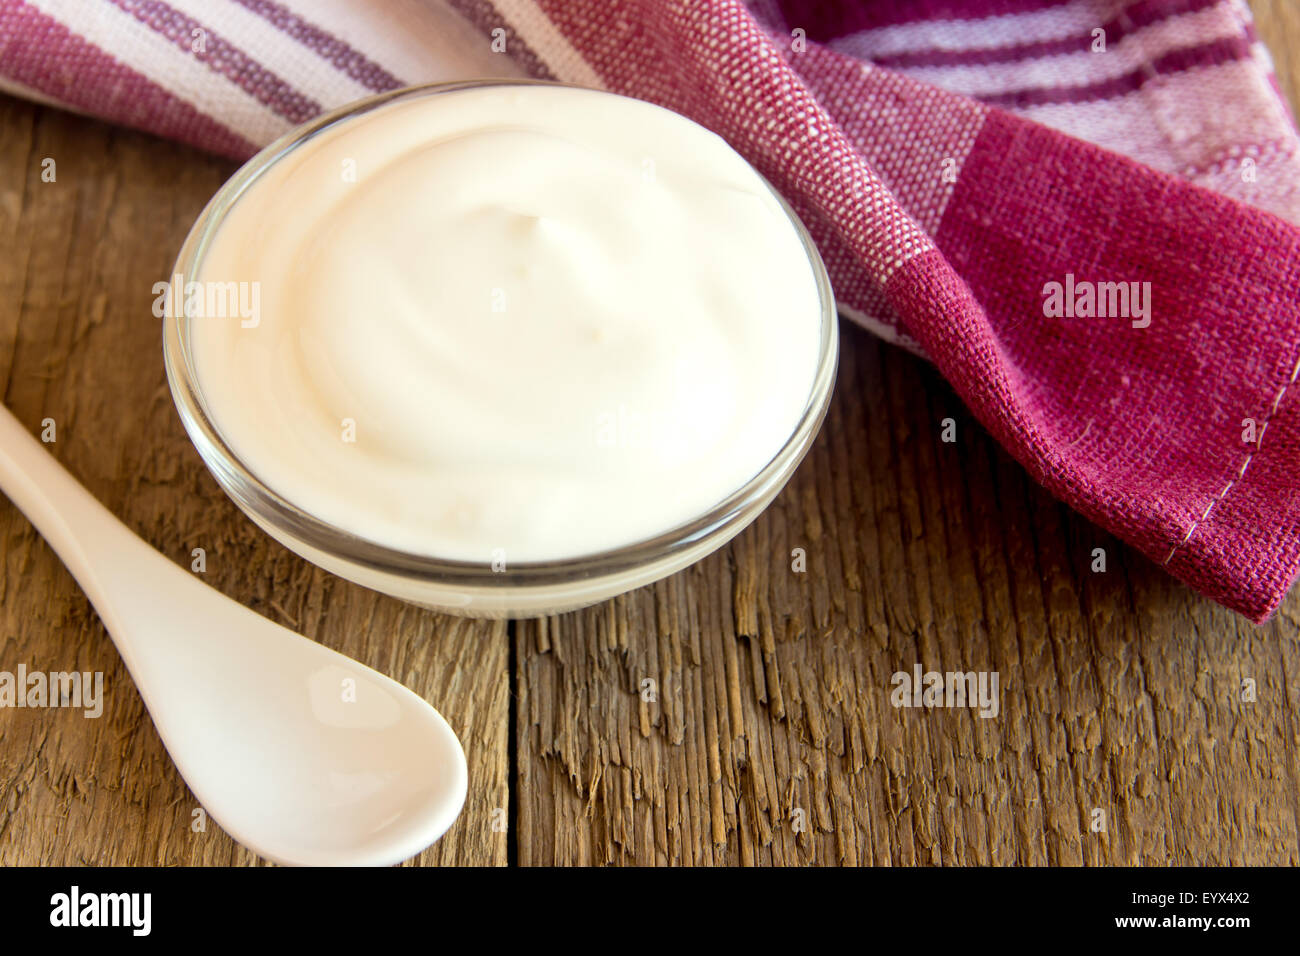 Sour cream (white sauce) with dill on wooden table, horizontal close up Stock Photo